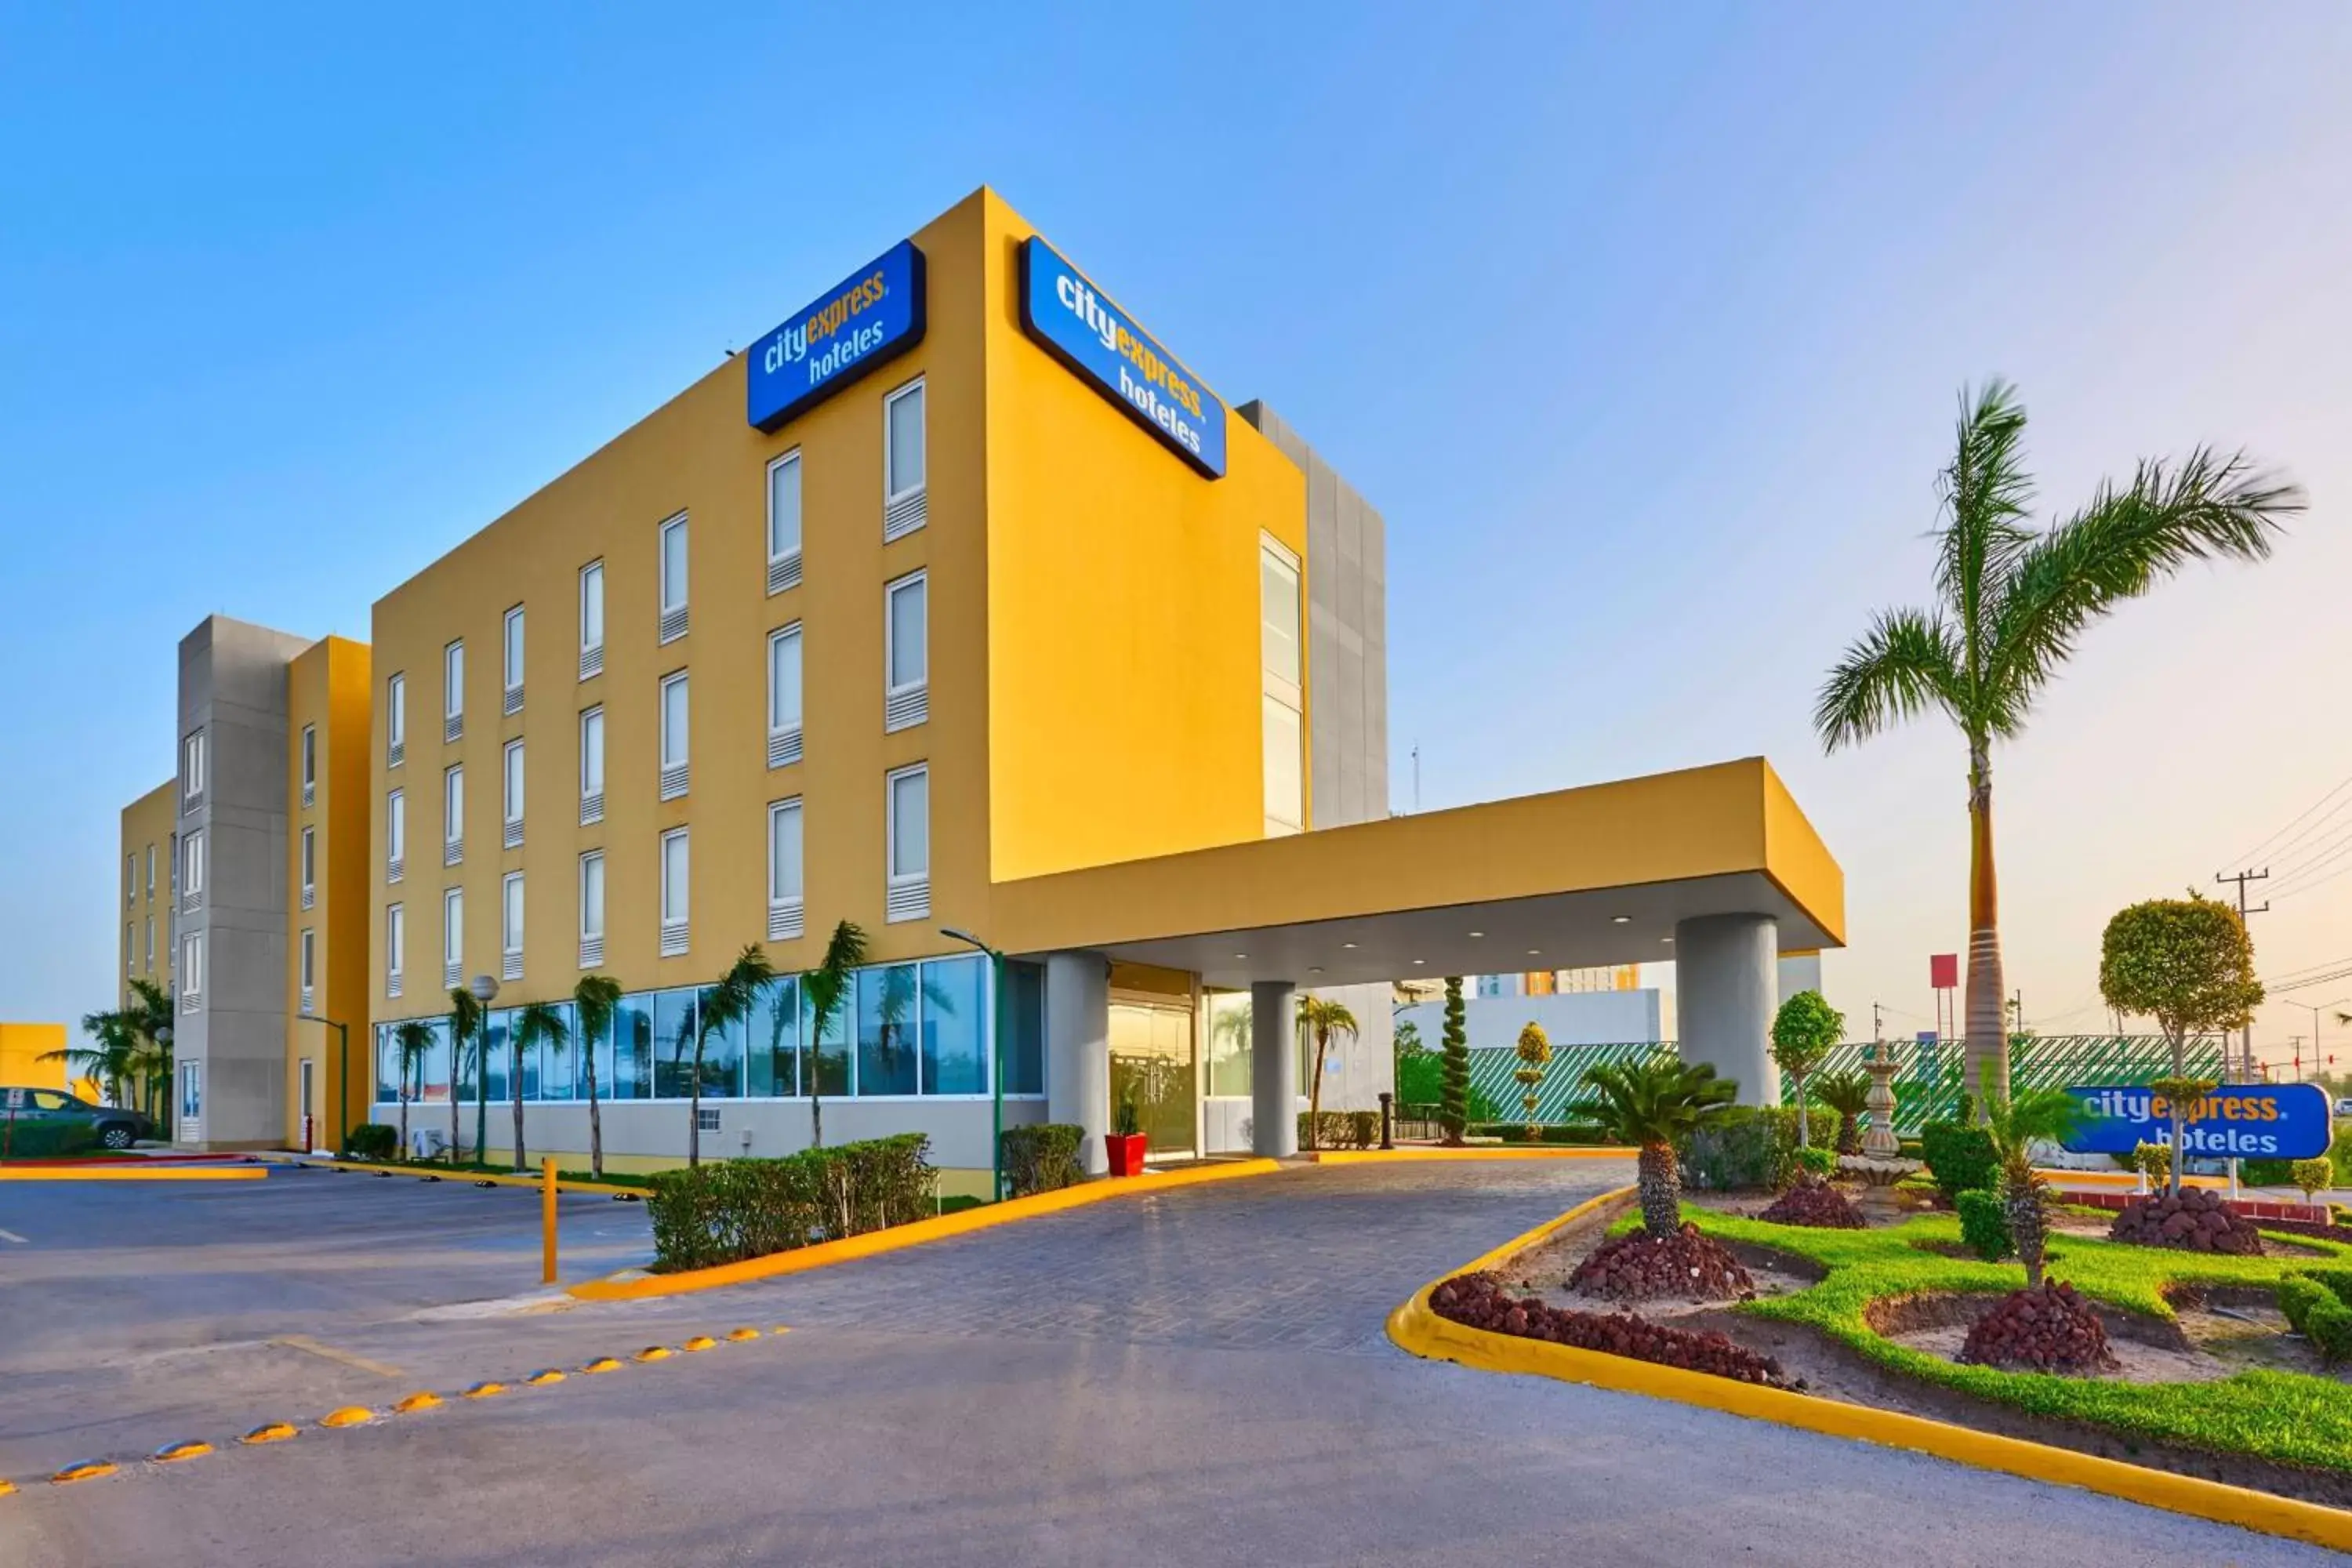 Property Building in City Express by Marriott Reynosa